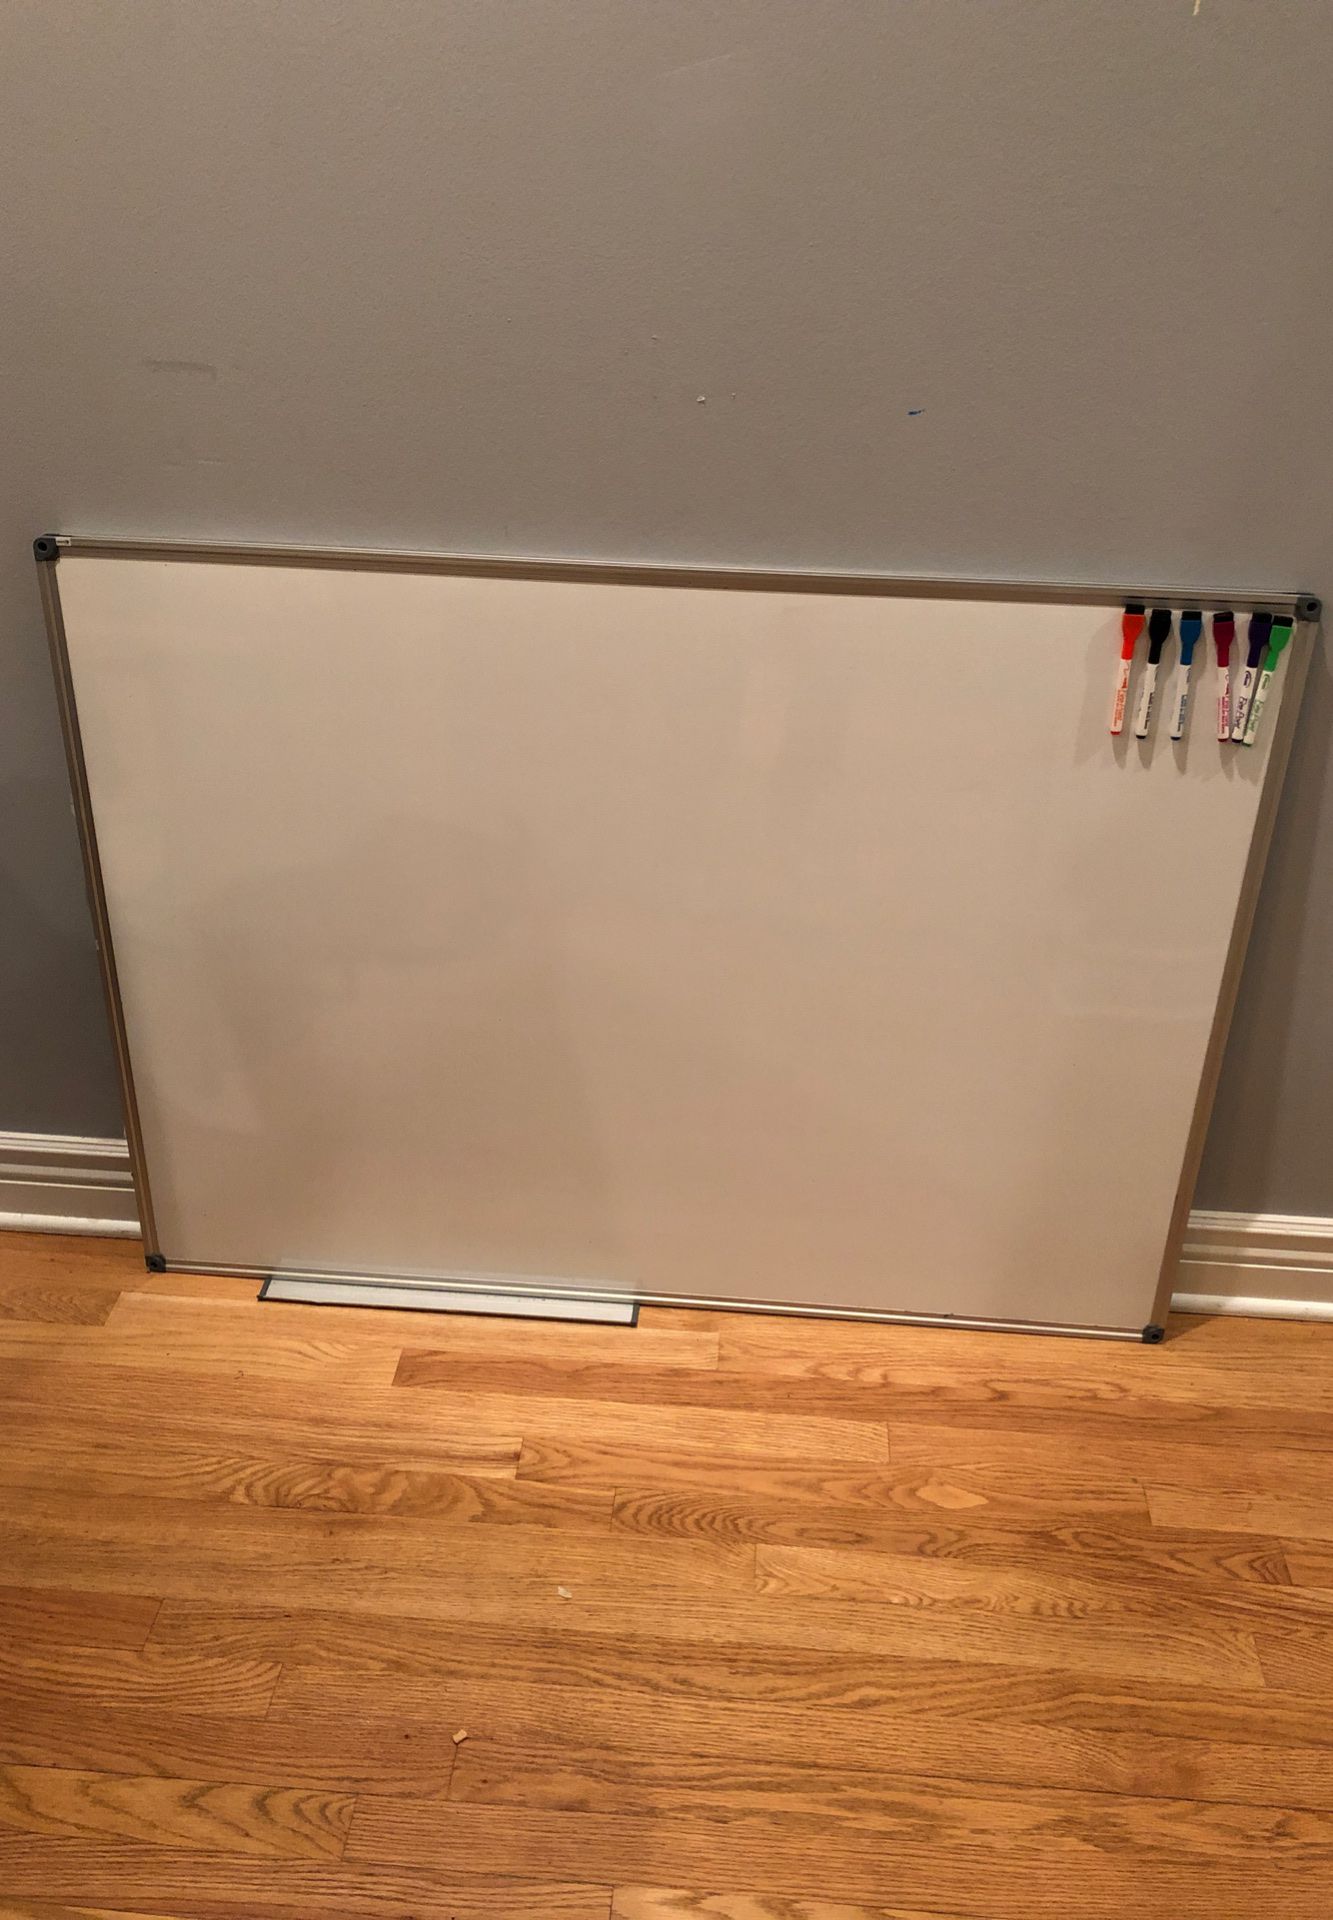 Large whiteboard and markers